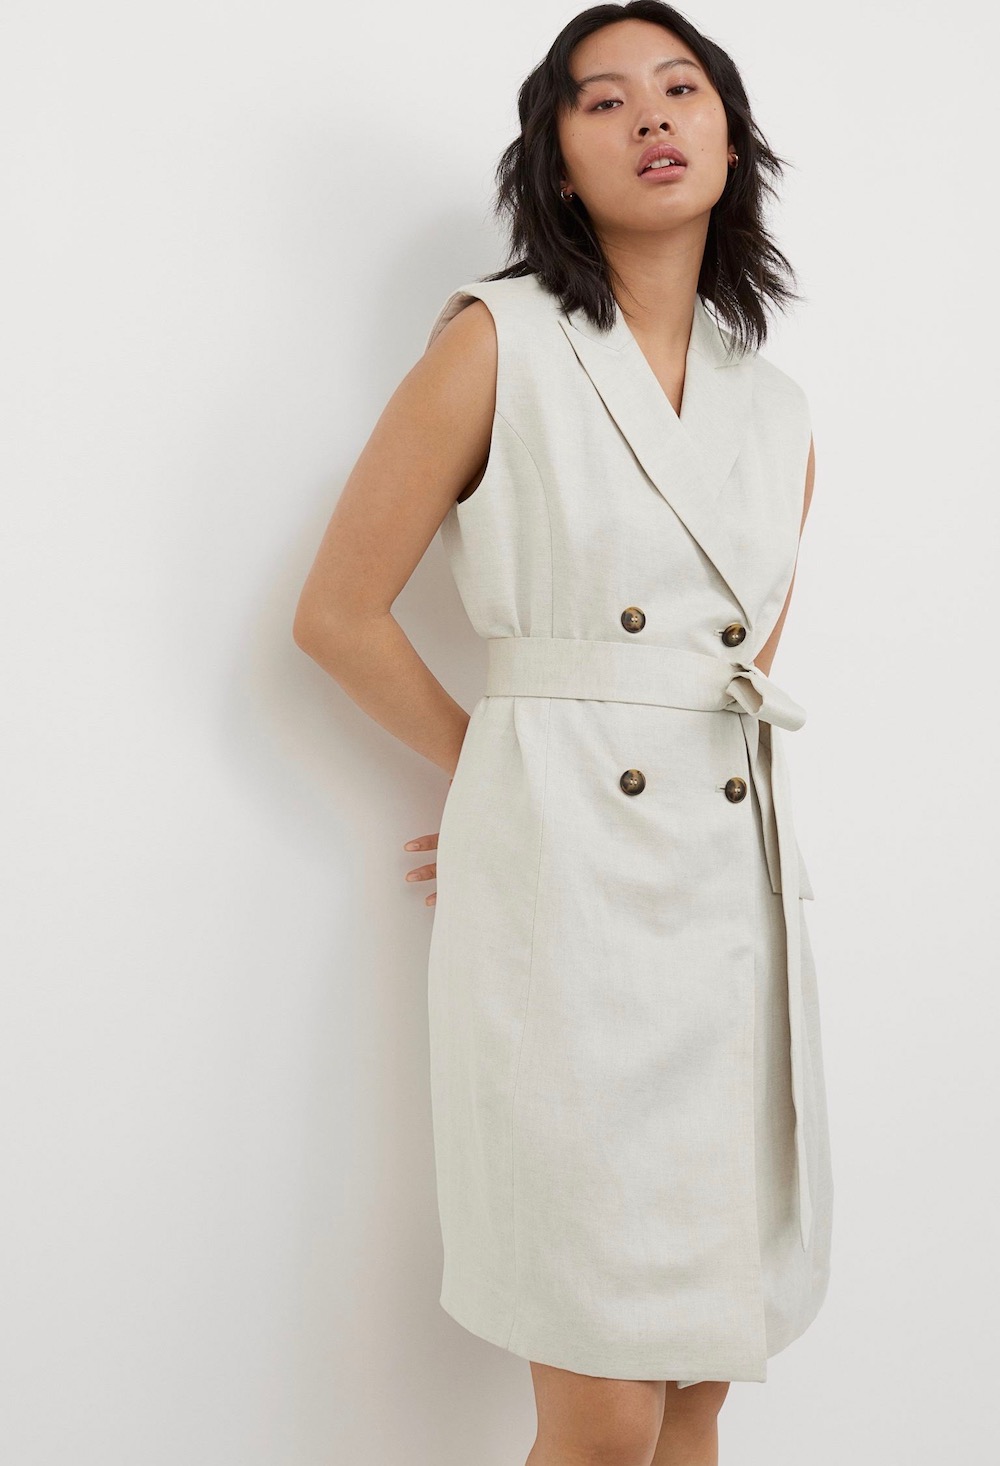 Trench Dresses to Add to Your Summer Lineup - theFashionSpot